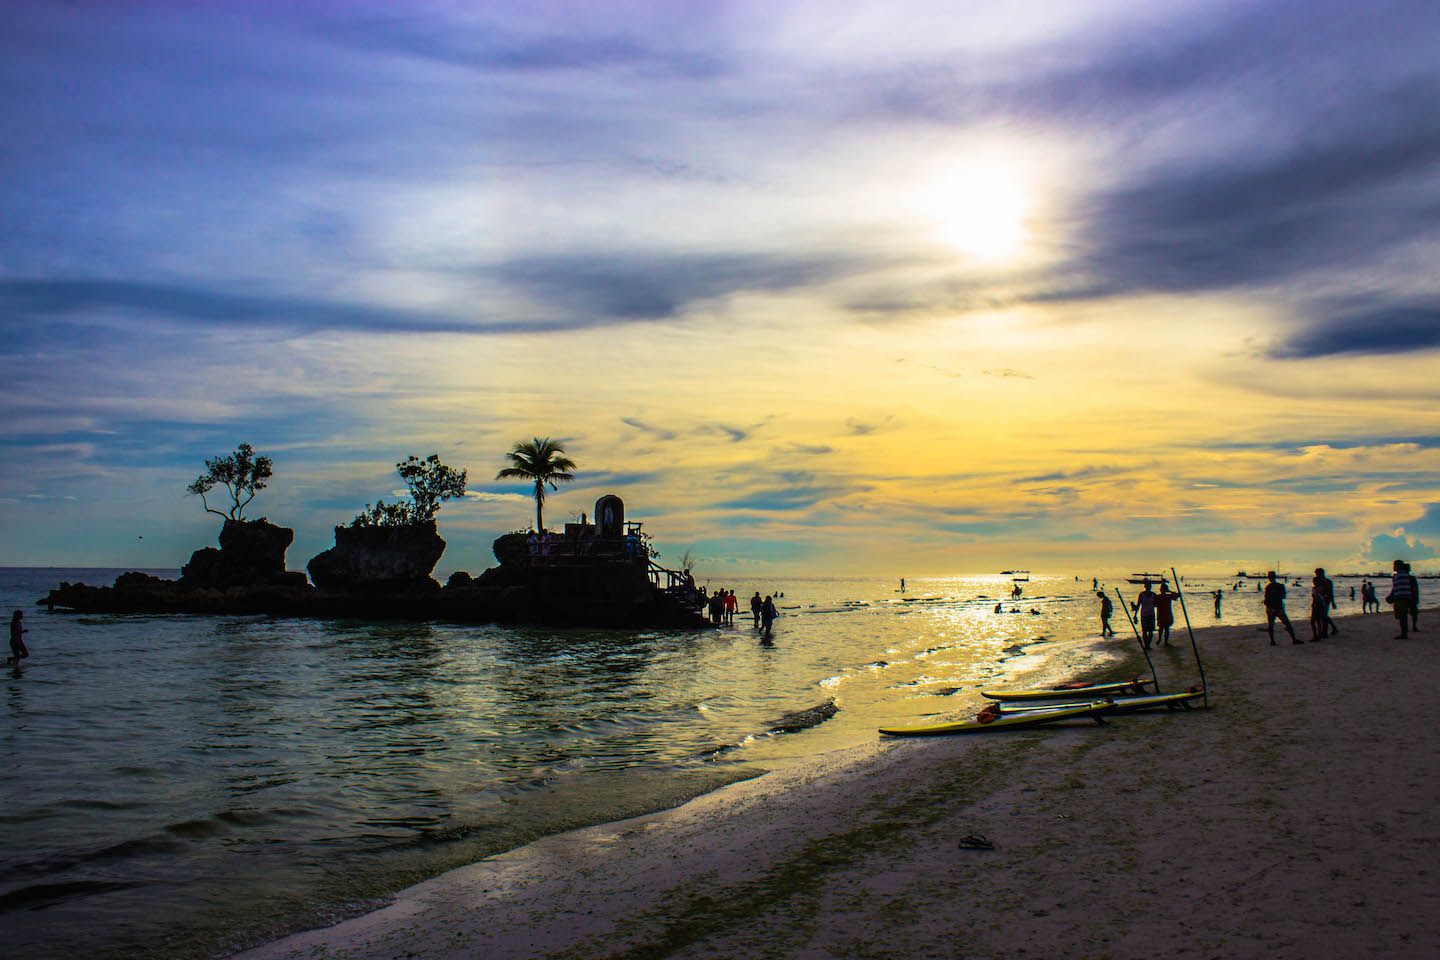 VIew of Willy's Rock, Boracay, Philippines